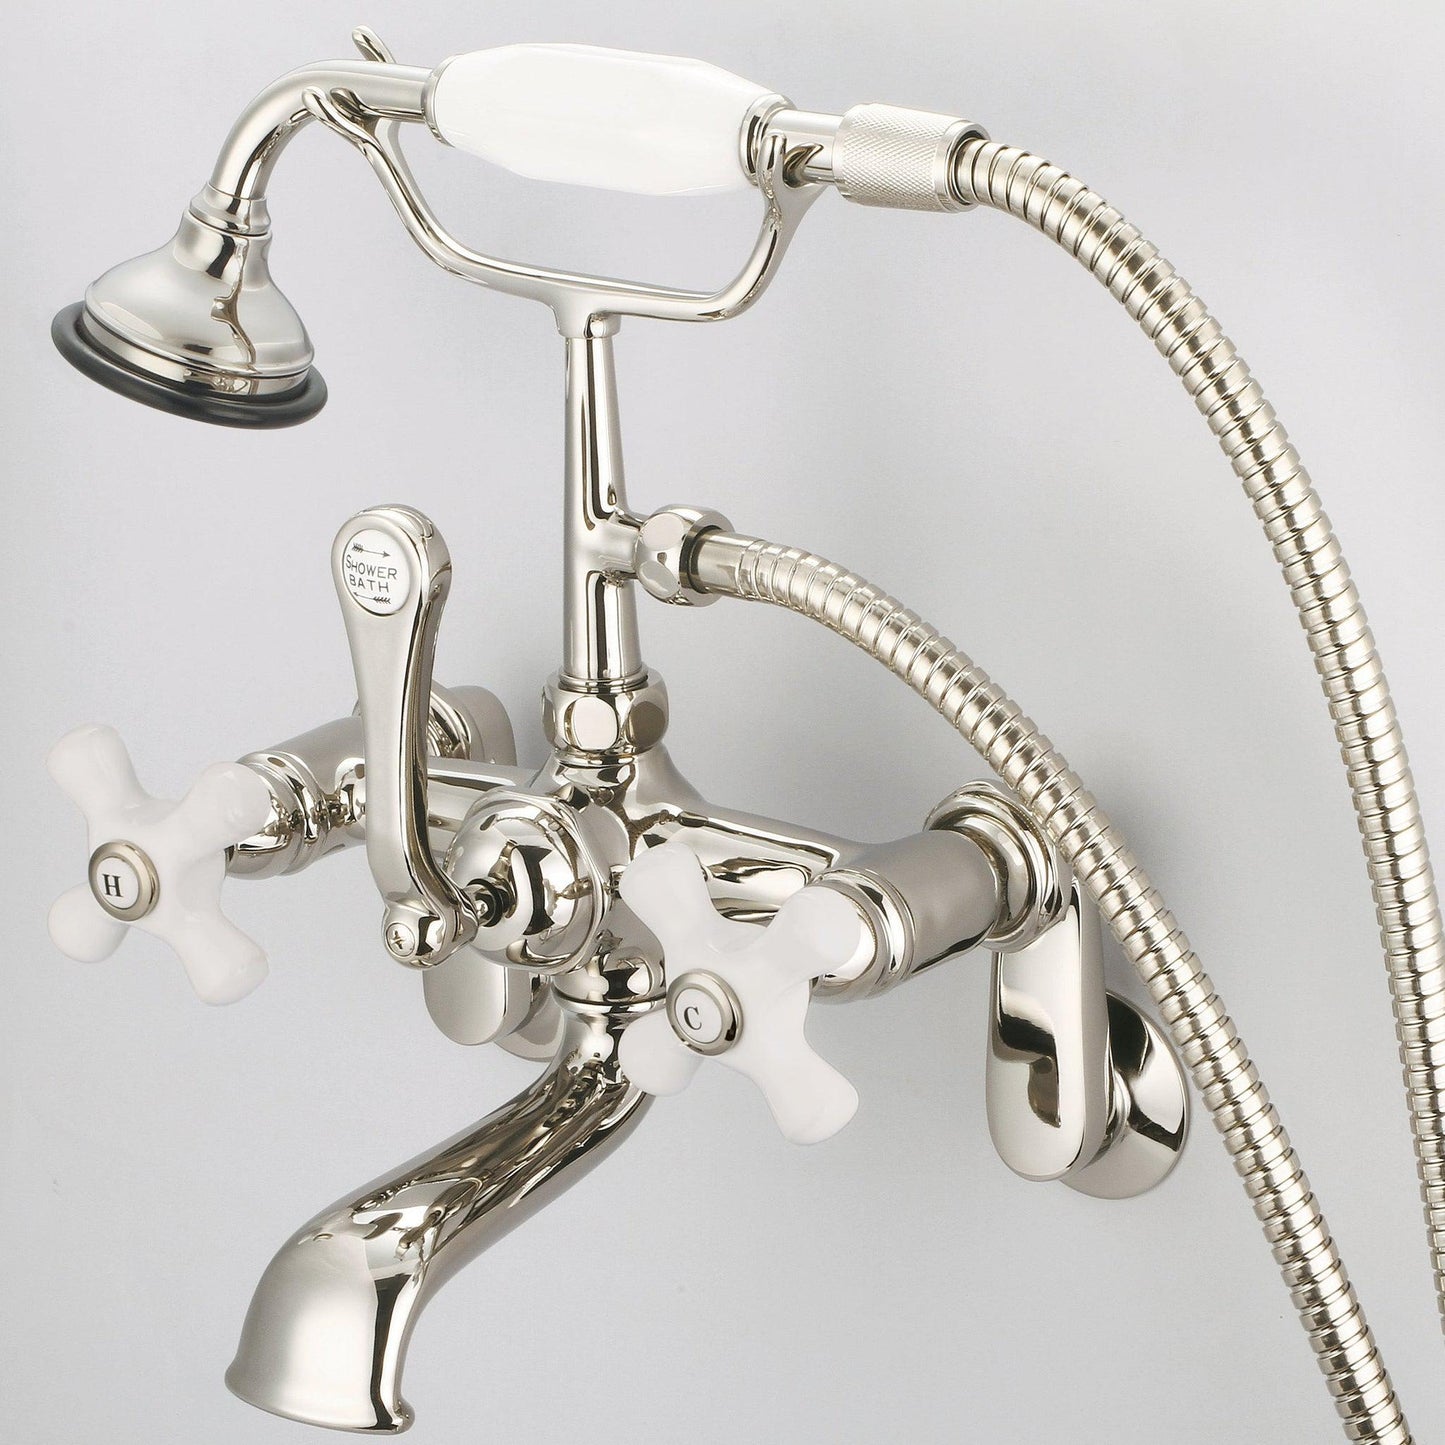 Water Creation Vintage Classic Adjustable Center Deck Mount Tub F6-0009 7" Ivory Solid Brass Faucet With Swivel Wall Connector And Handheld Shower And Porcelain Cross Handles, Hot And Cold Labels Included